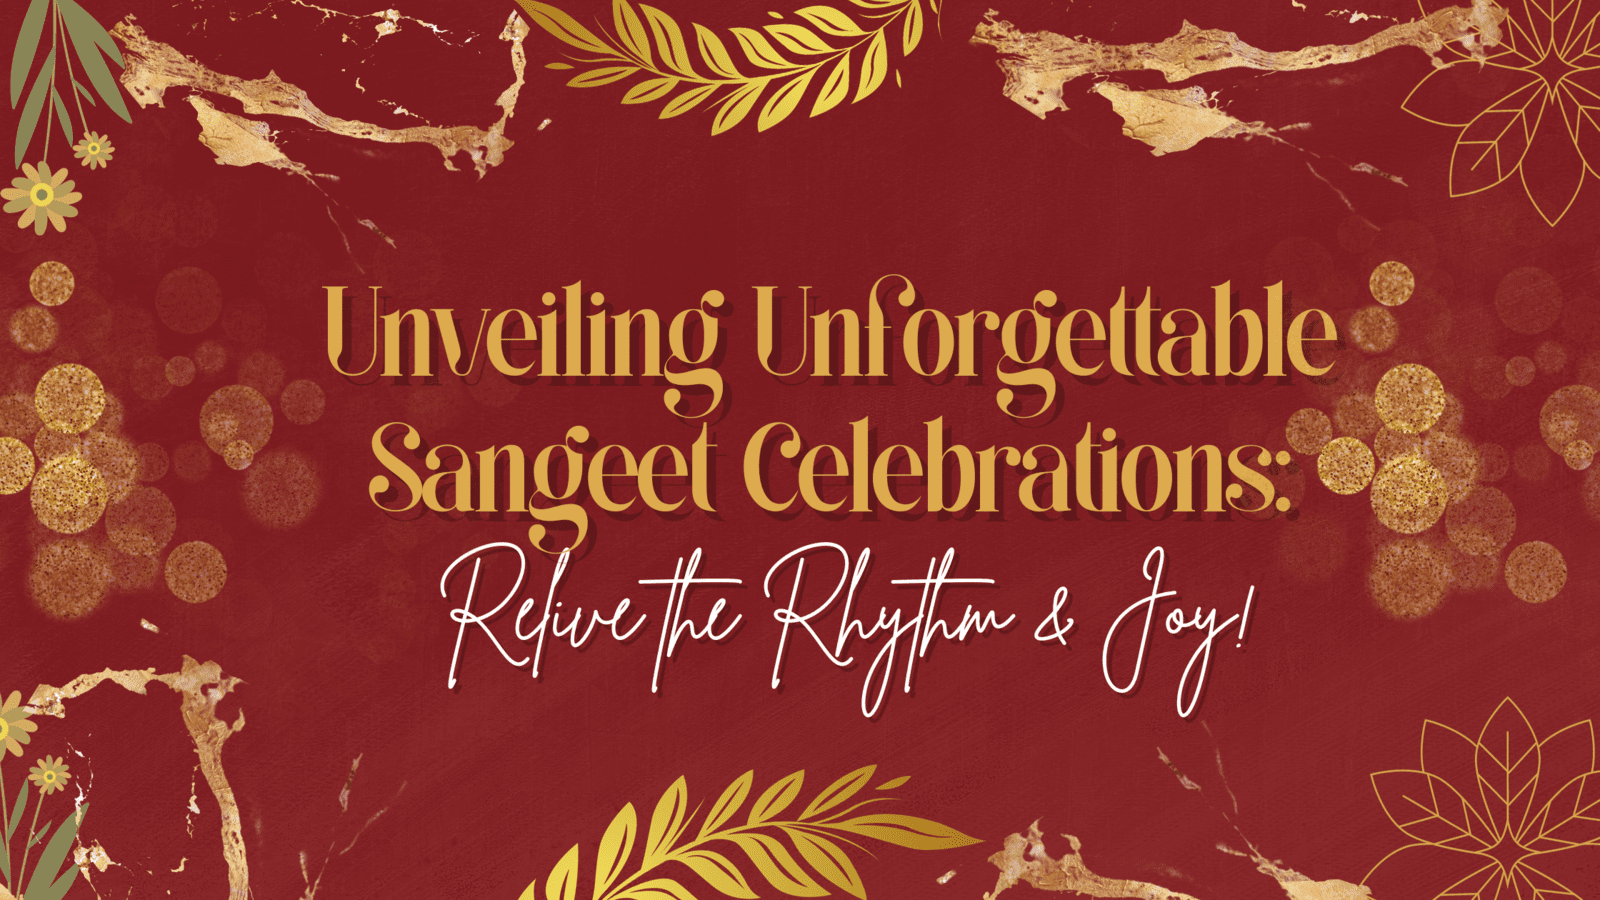 Unveiling Unforgettable Moments: A Spotlight on Our Vibrant Sangeet Celebrations!